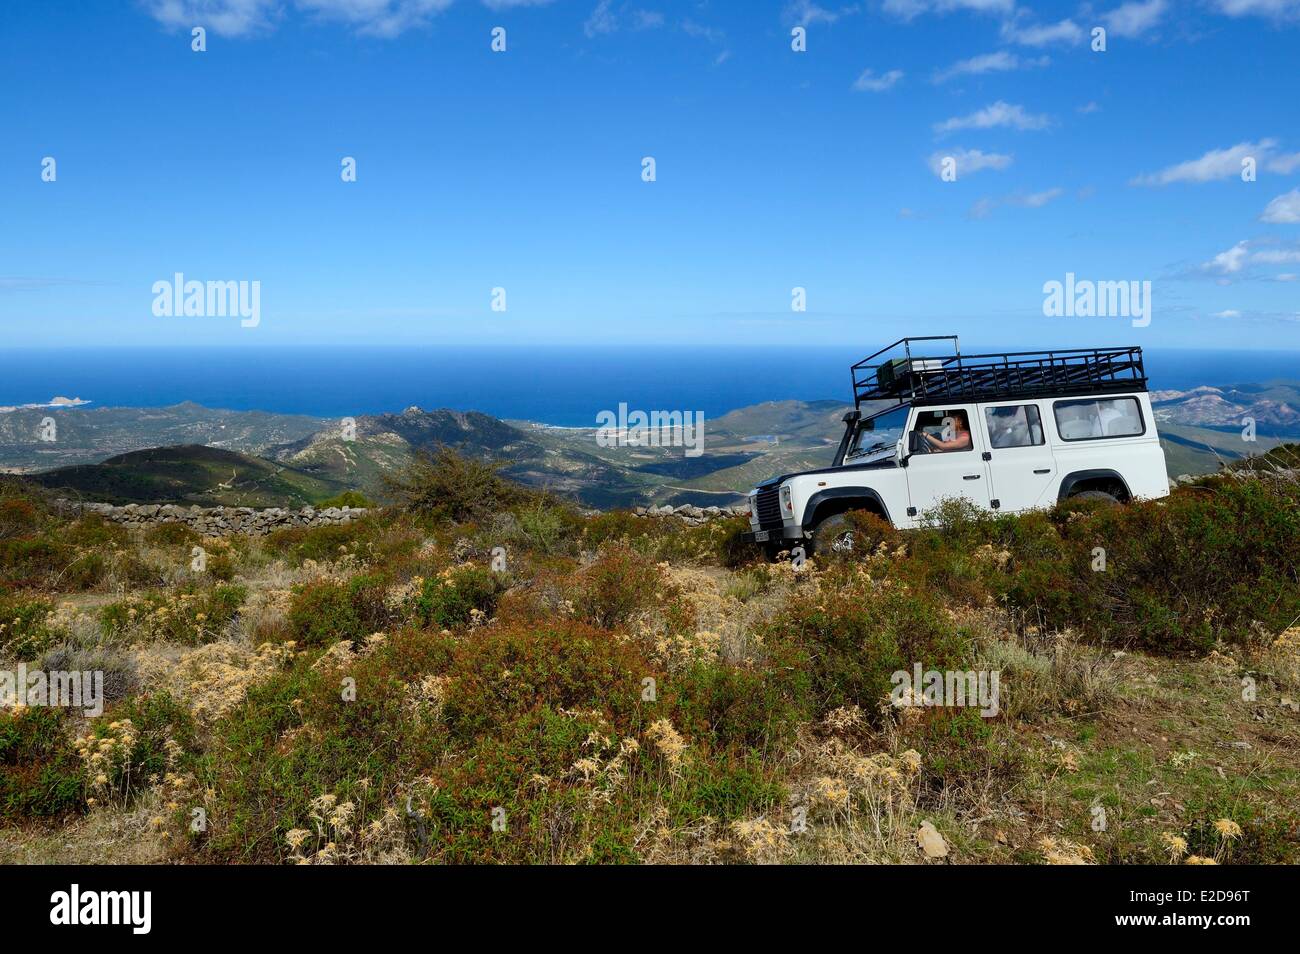 France, Haute Corse, Balagne, discovery of the Giussani in 4x4 vehicle Stock Photo